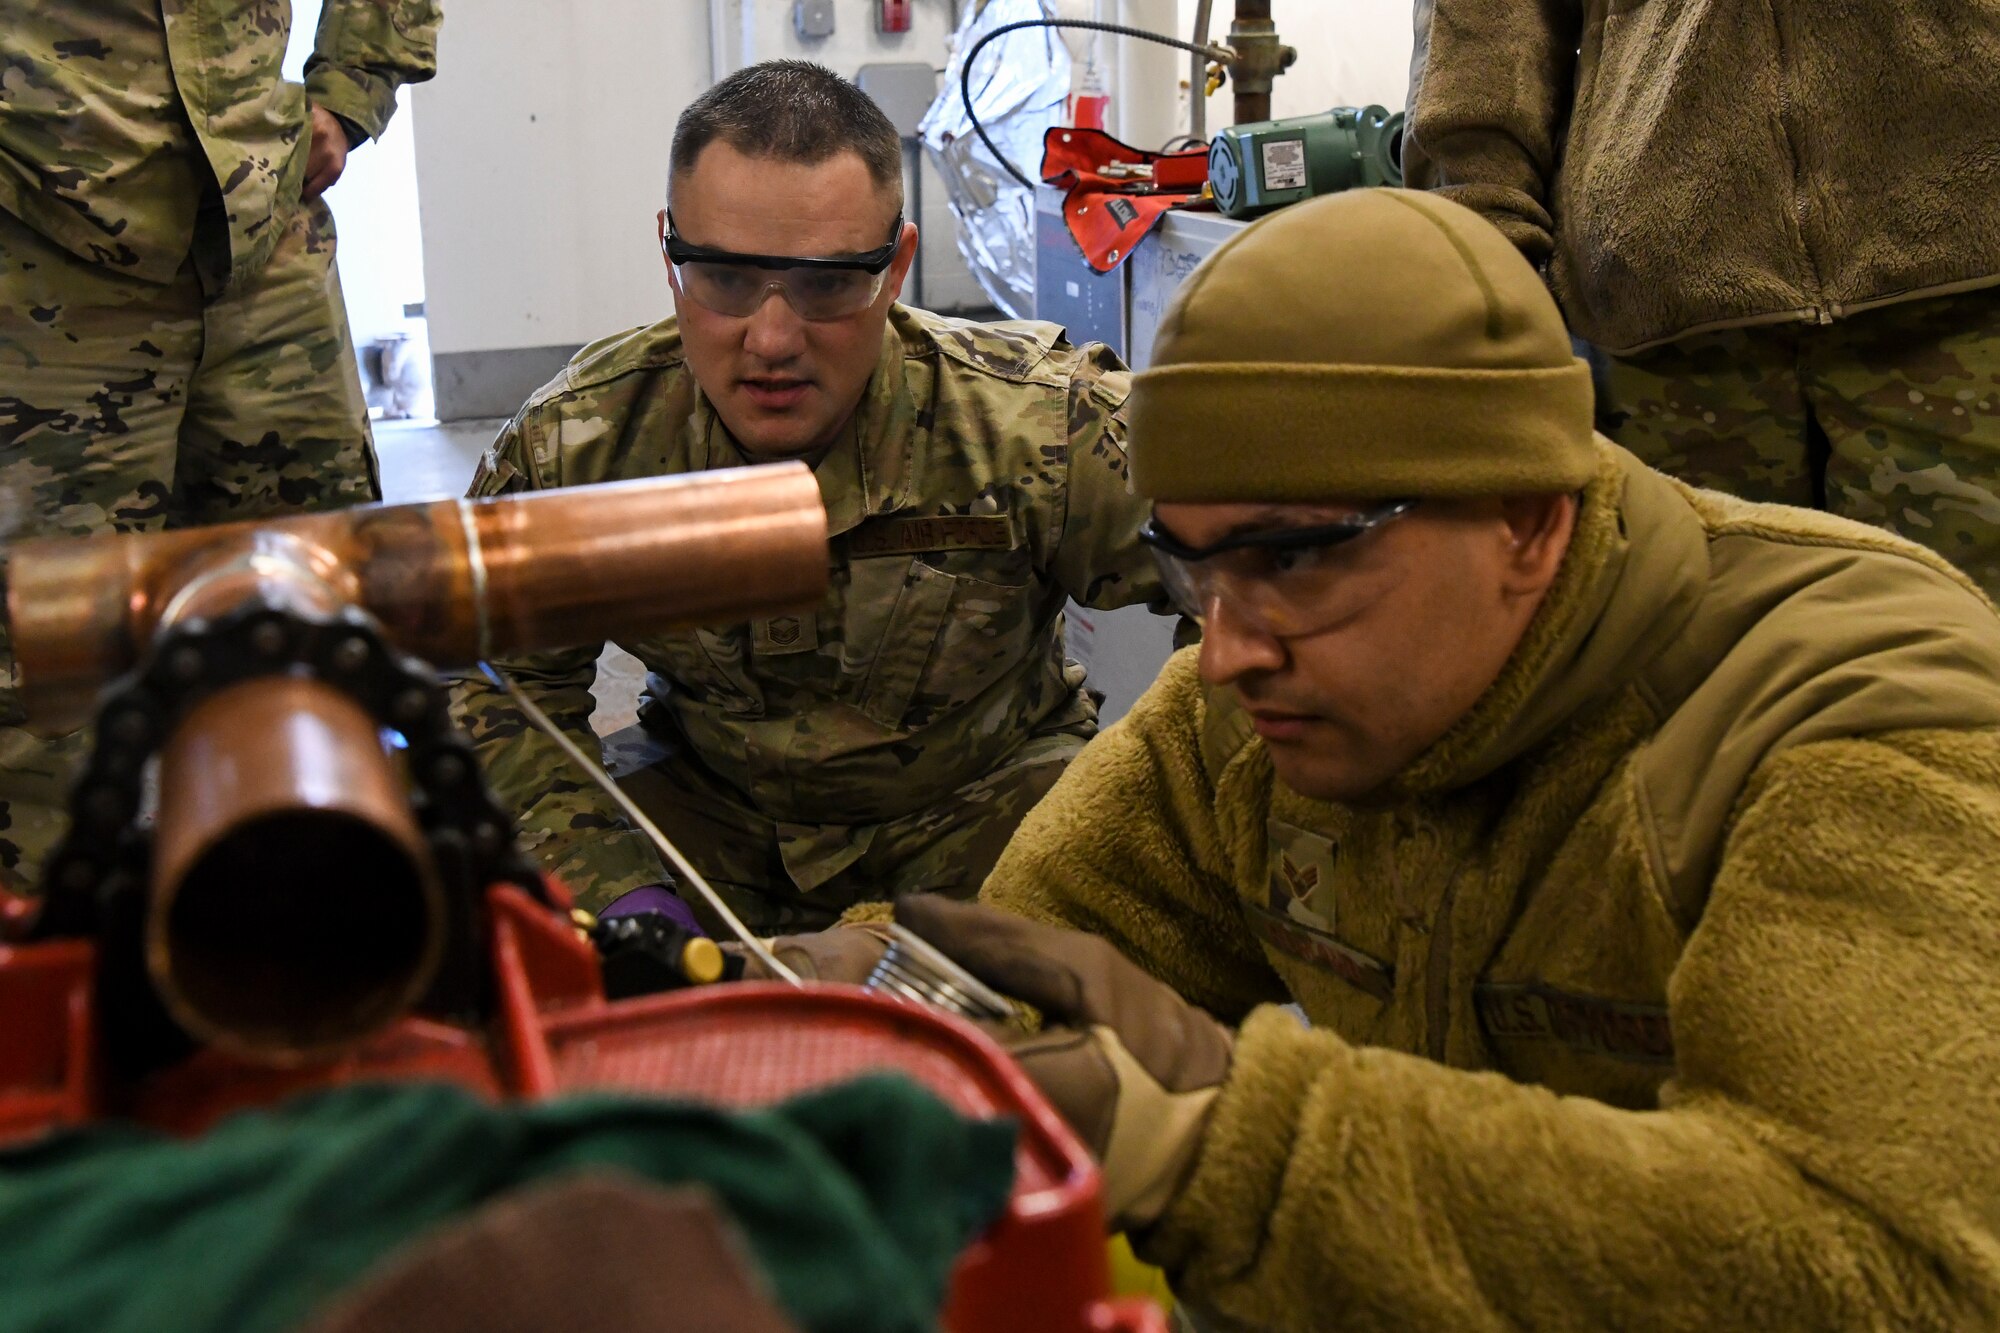 U.S. Air Force Master Sgt. Eric Cush, the operation supervisor, and Senior Airman David Romano, an HVAC technician, both of the 106th Rescue Wing, Francis S. Gabreski Air National Guard Base, Westhampton Beach, New York Air National Guard, prepare copper pipes to replace a broken water heater in the Services kitchen on base, March 5, 2022. The 106th Services kitchen operations were halted due to a broken water heater during the March drill until the 106th engineers replaced the water heater within two hours of notification.
(U.S. Air National Guard photo by Staff Sgt. Daniel Farrell)